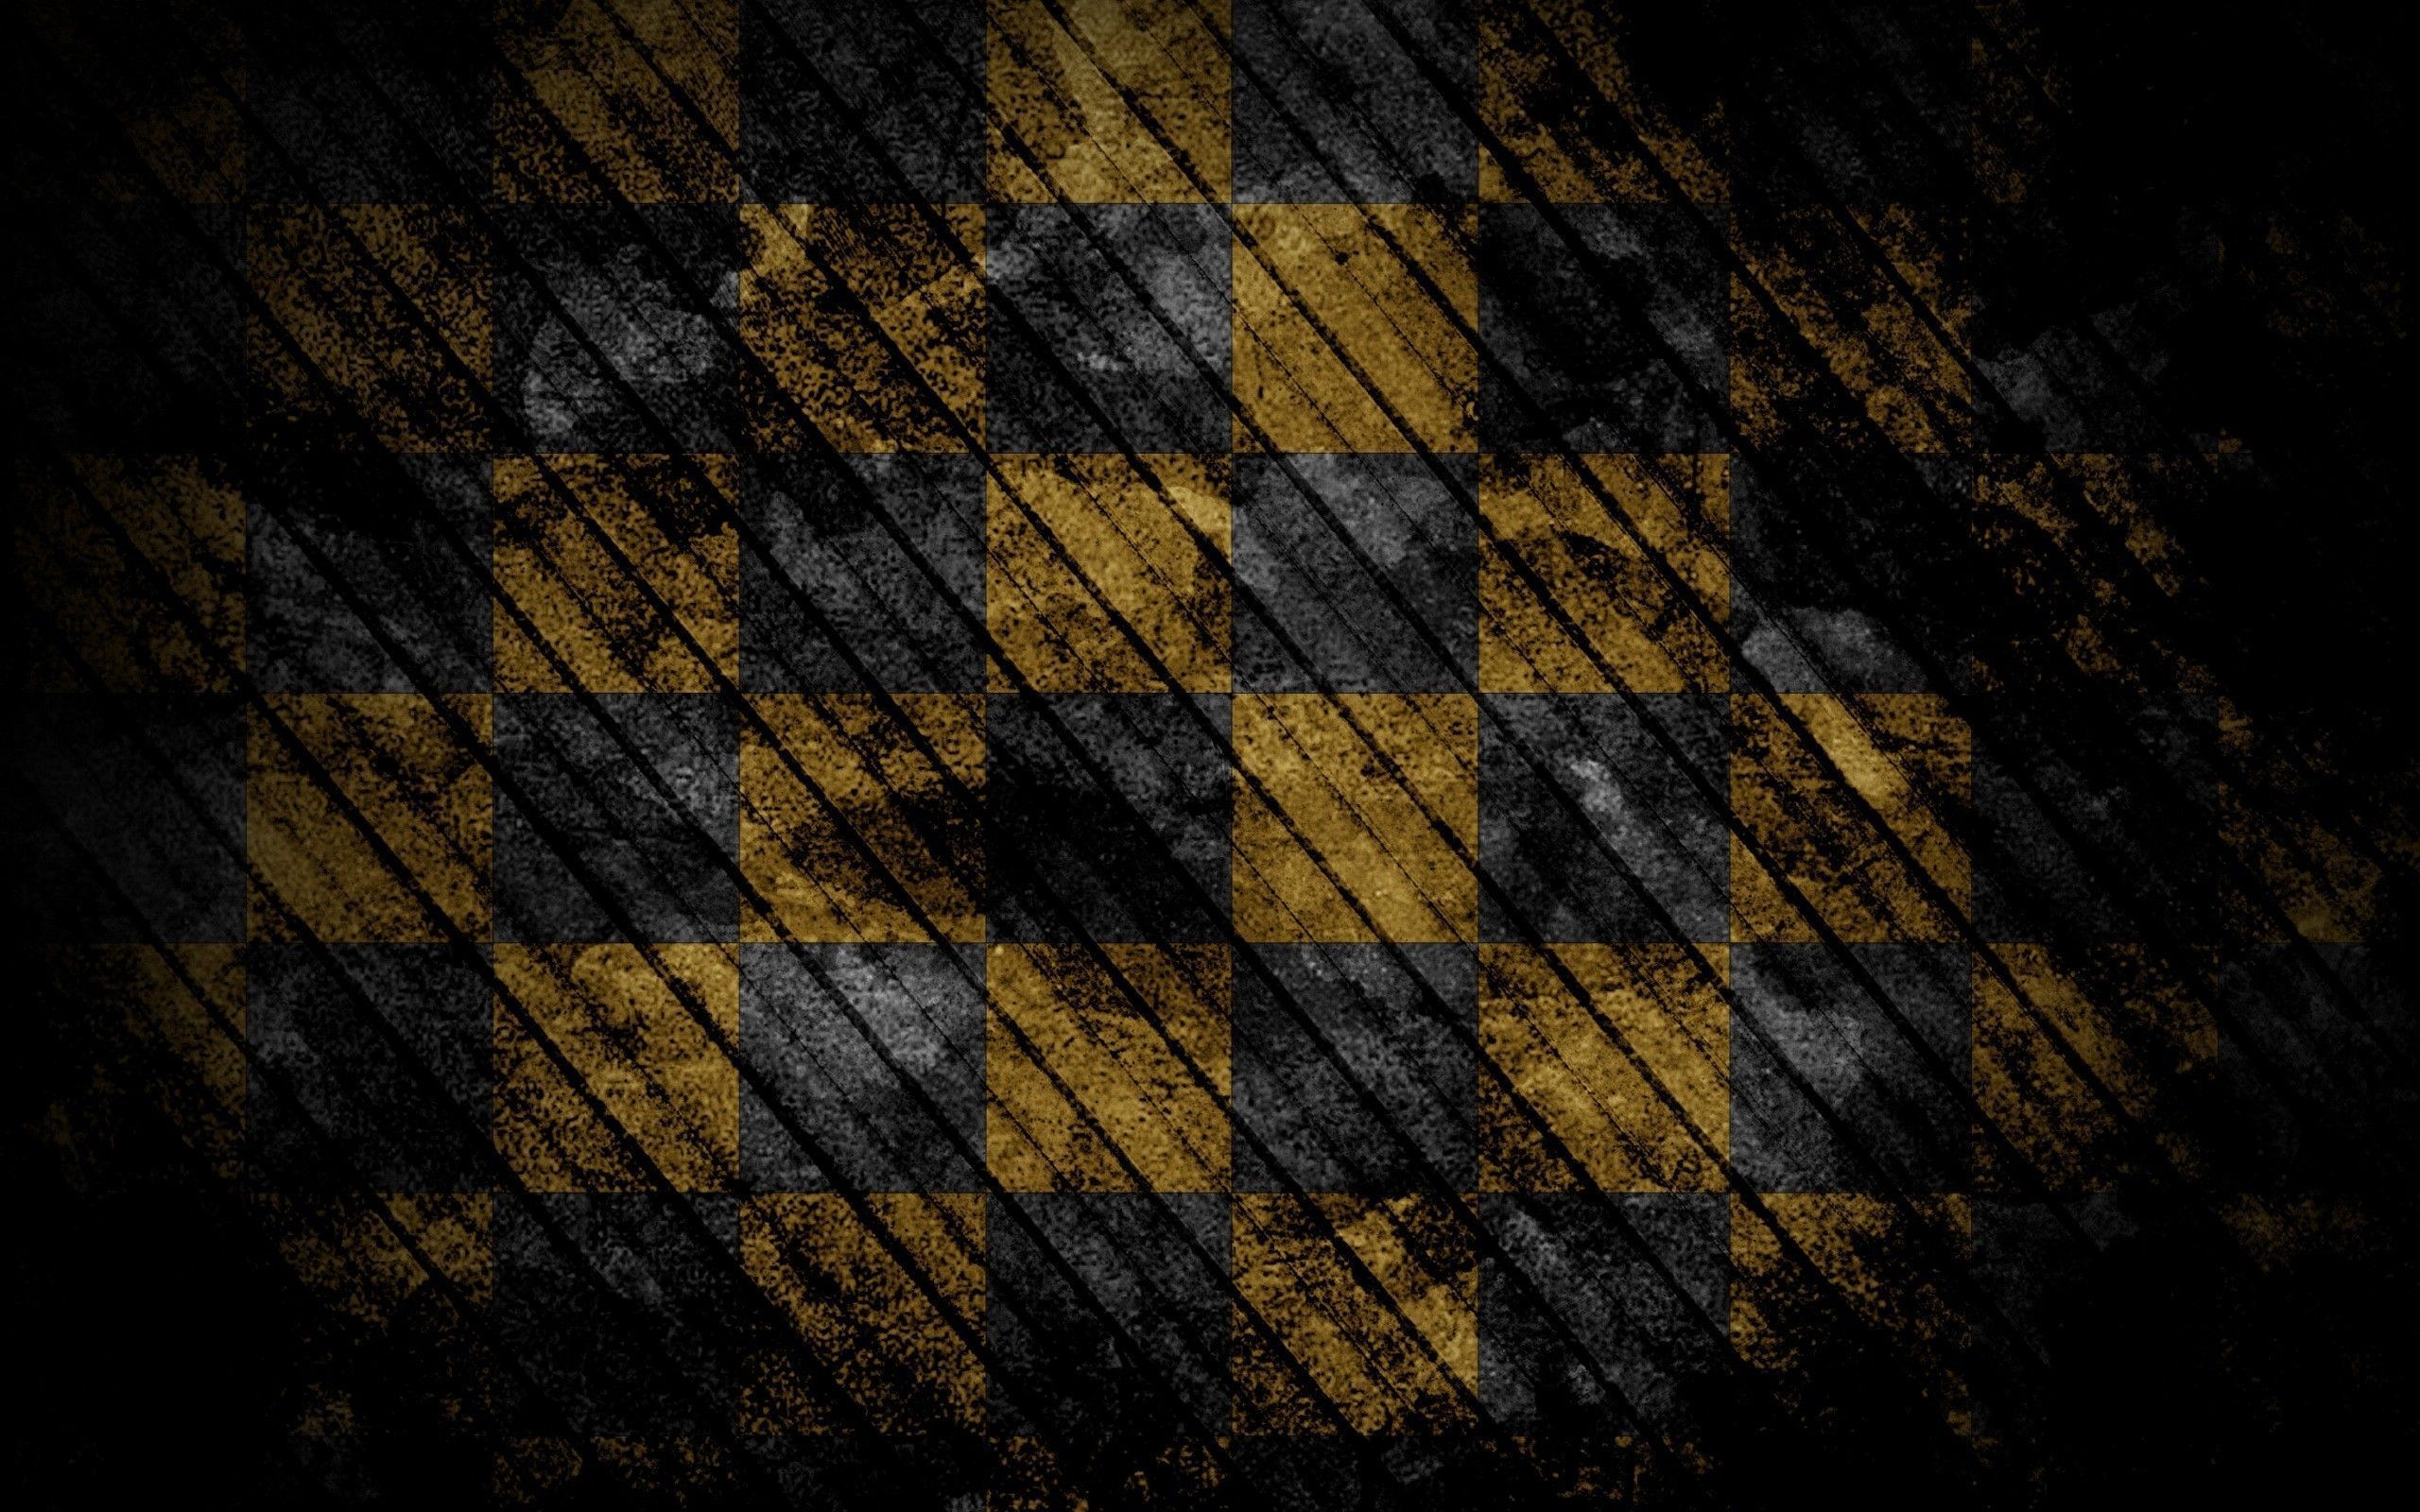 Black and Yellow Wallpaper Free 2519 - HD Wallpapers Site